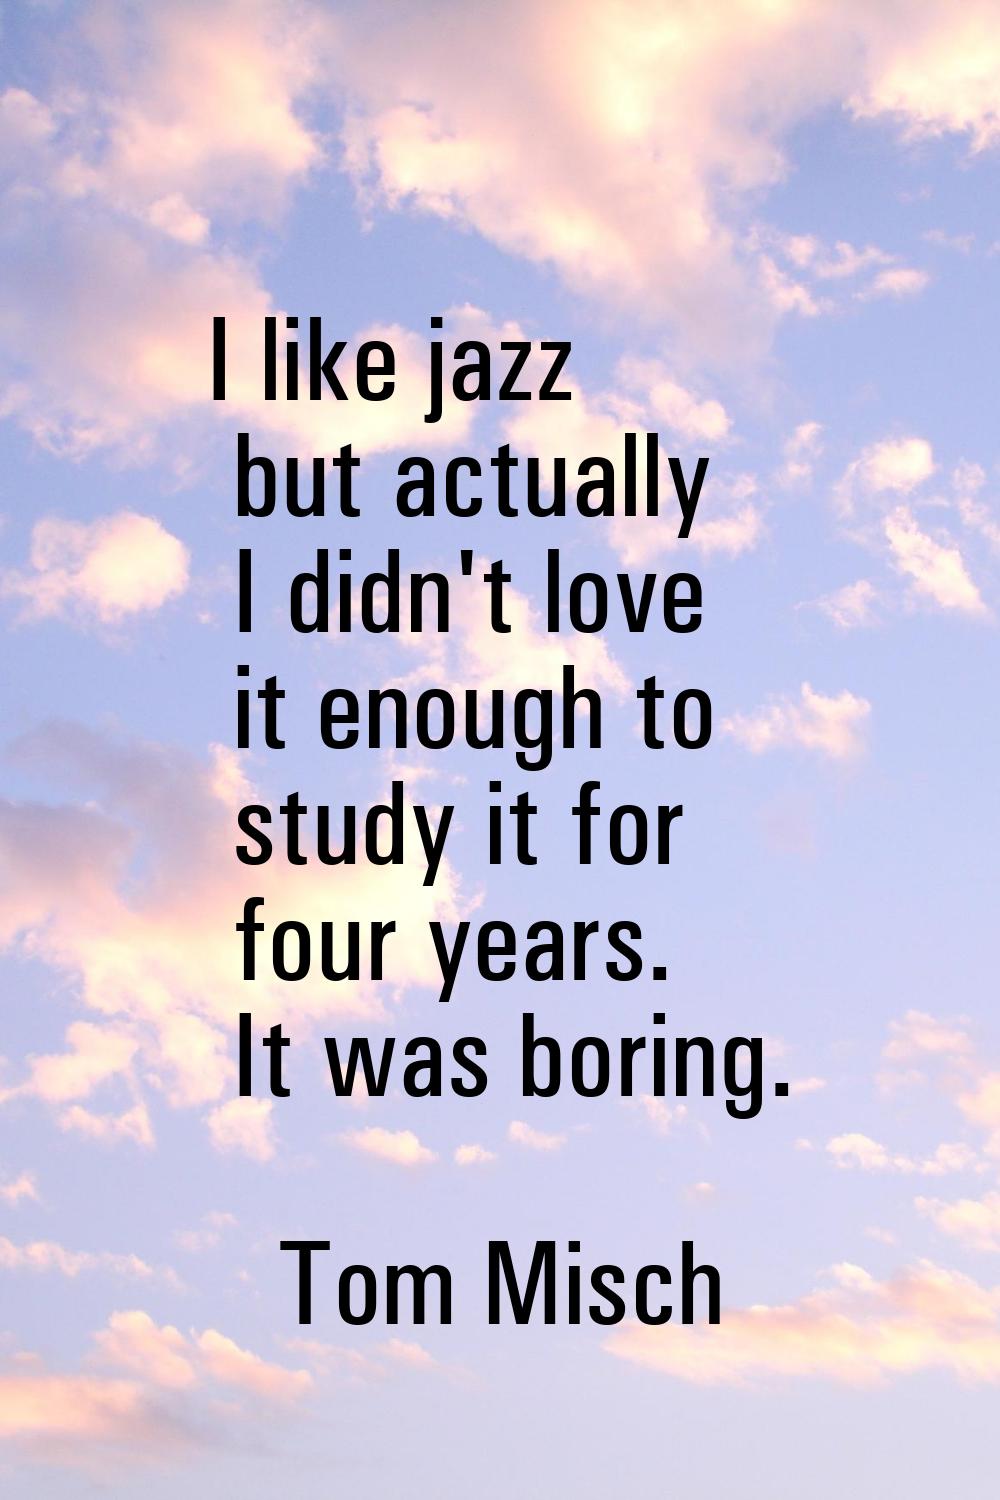 I like jazz but actually I didn't love it enough to study it for four years. It was boring.